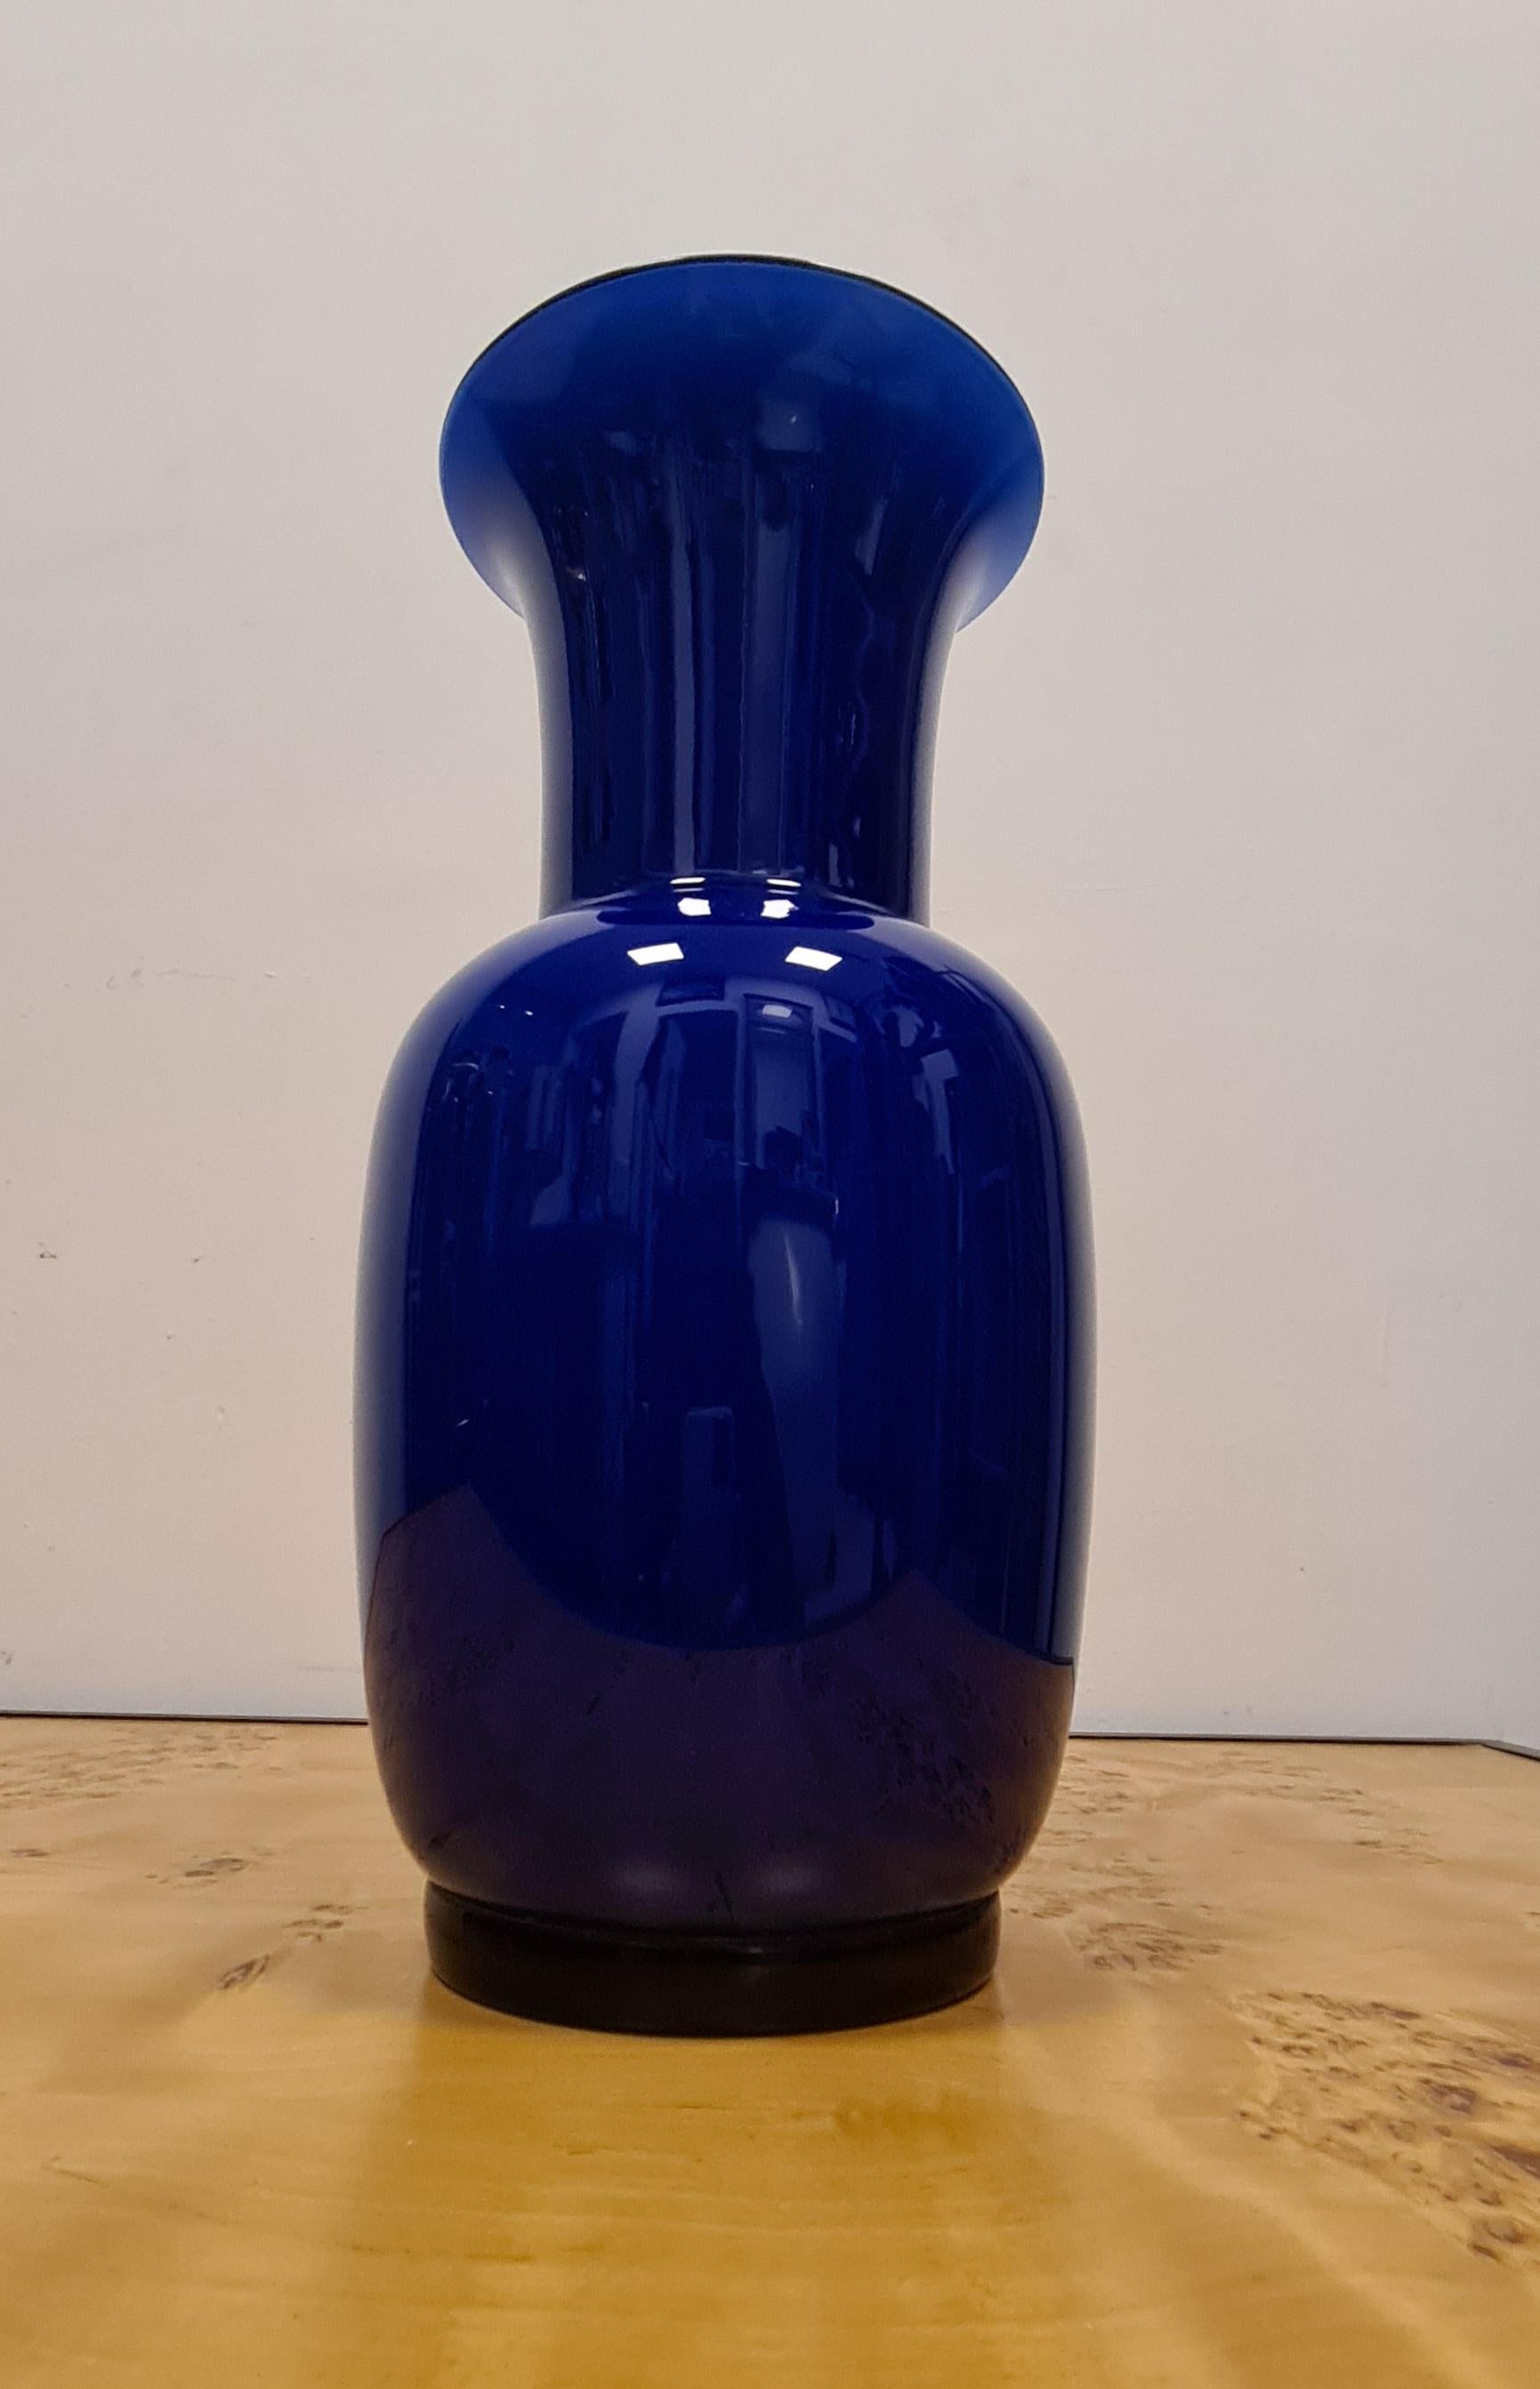 Opaline glass vase model 706.22 from the Venini glassworks.

Refined vase designed by Paolo Venini in 1932.

The elegance of opaline glass comes from overlaying colored glass with lattimo glass , a complex process that originated in the 15th century